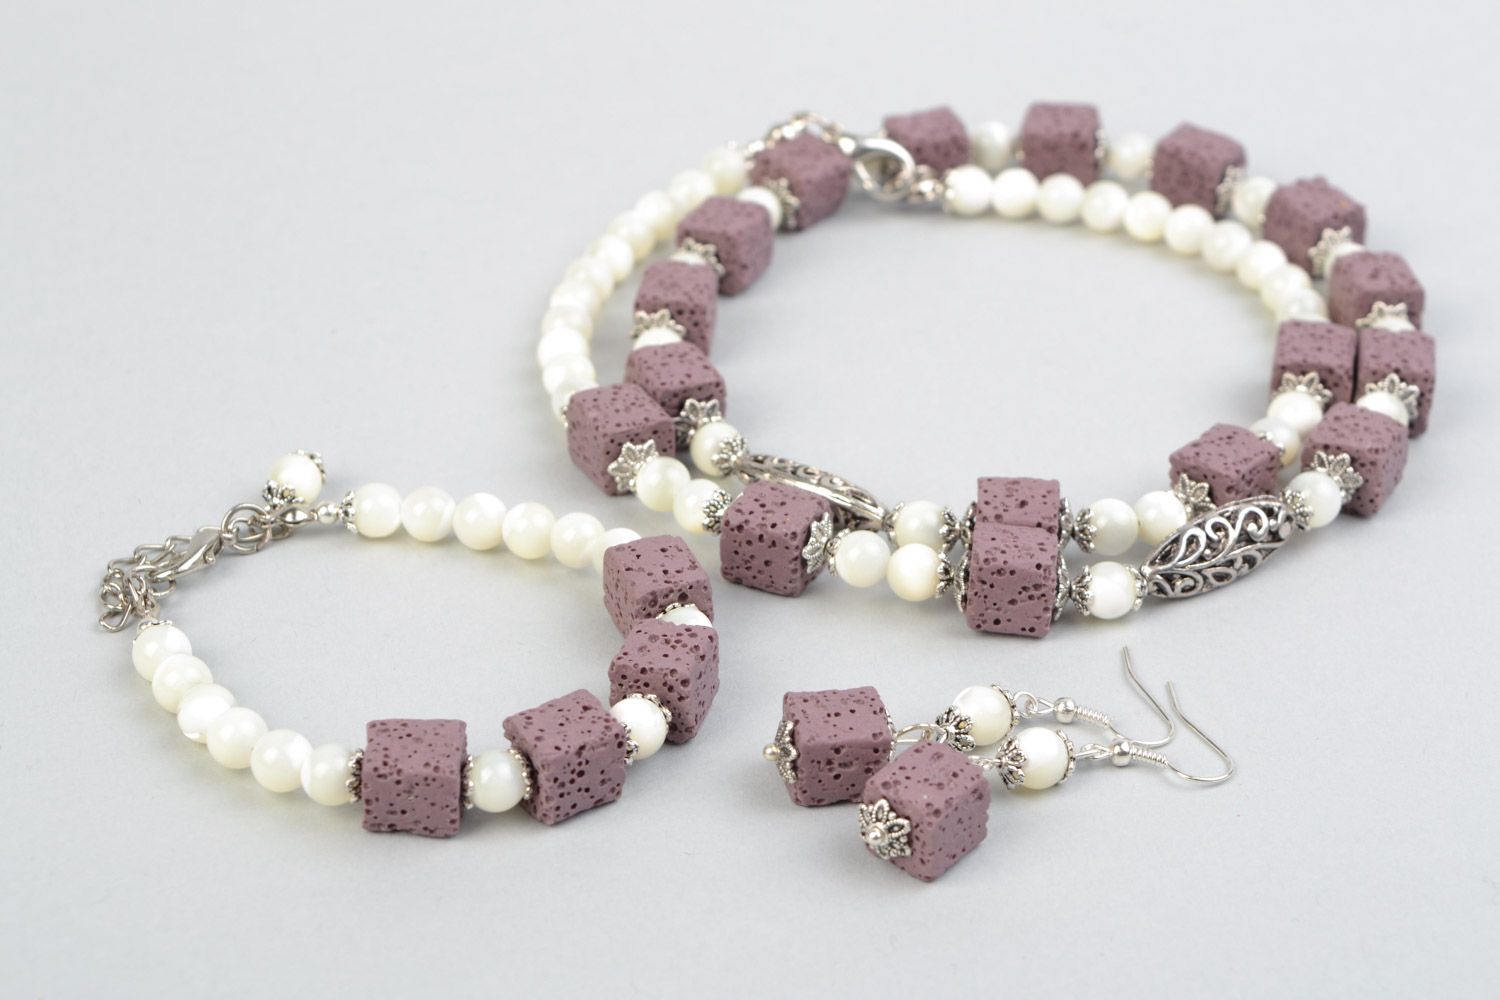 Handmade natural stone and nacre jewelry set earrings bracelet and necklace photo 3